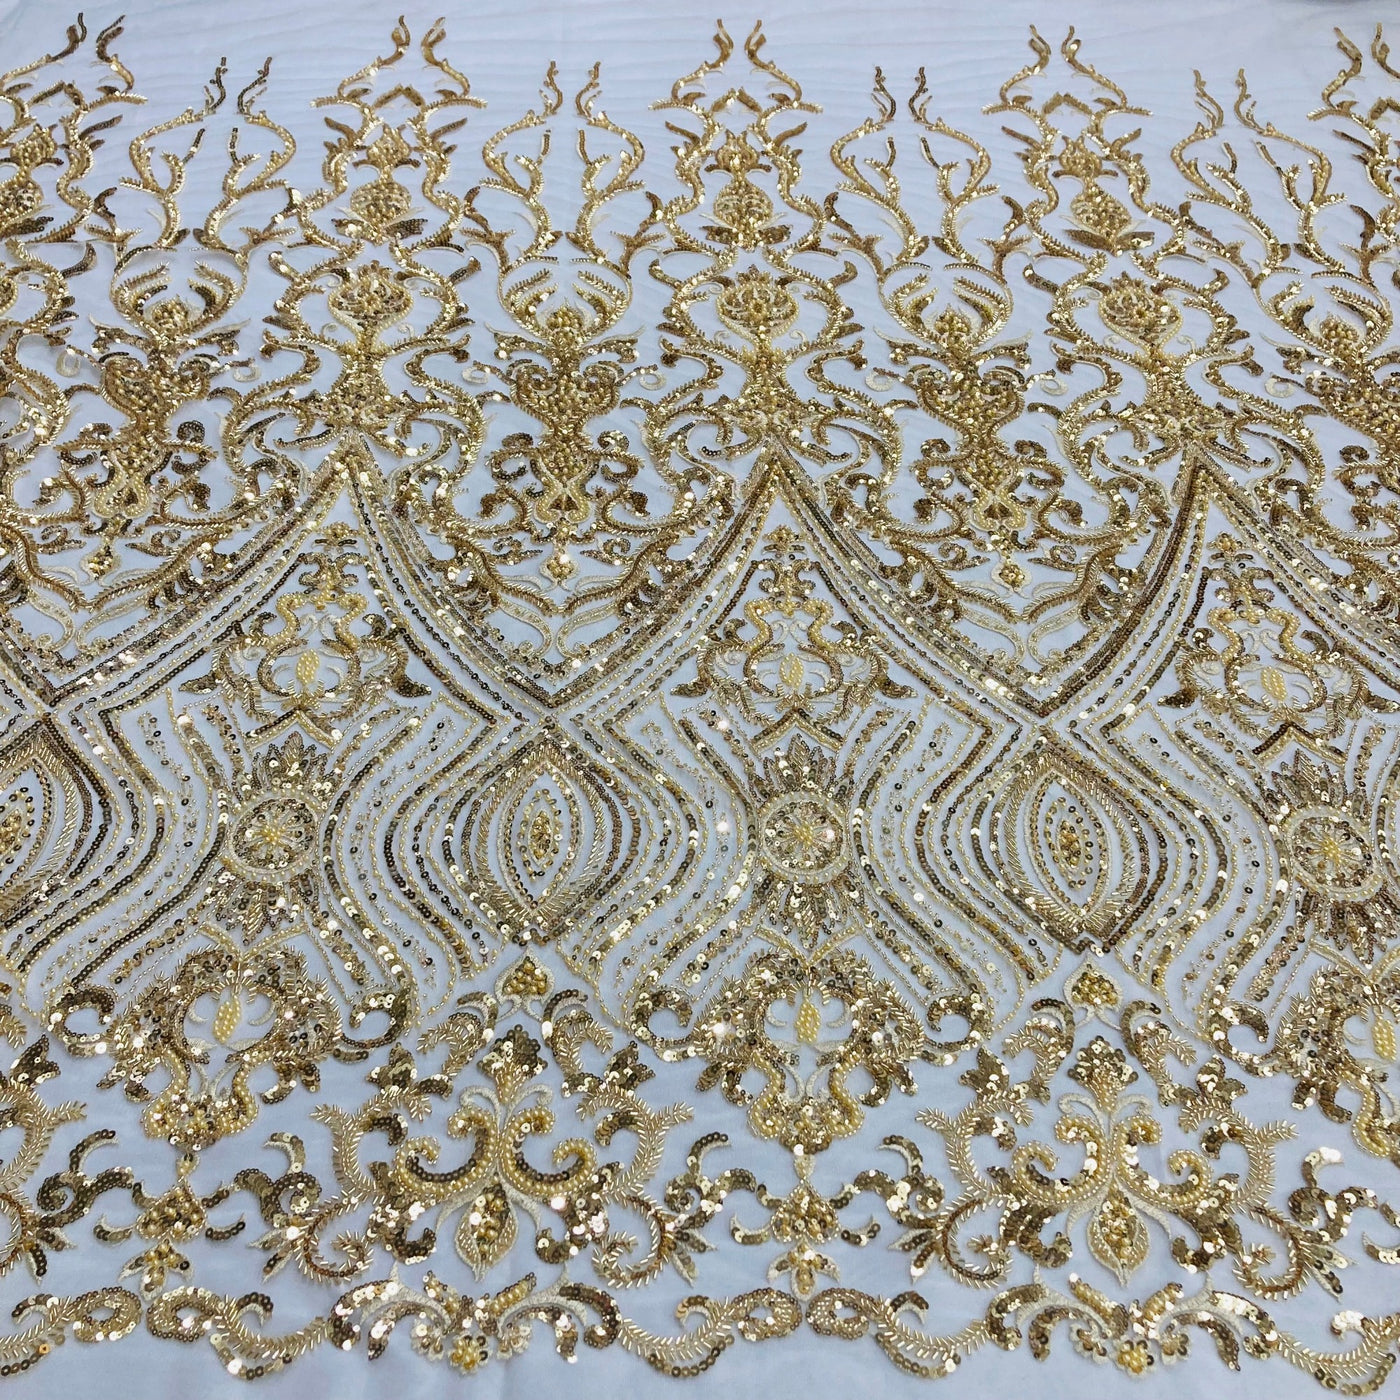 Gold Embroidered & Beaded Net Mesh Fabric with Beads. Lace USA